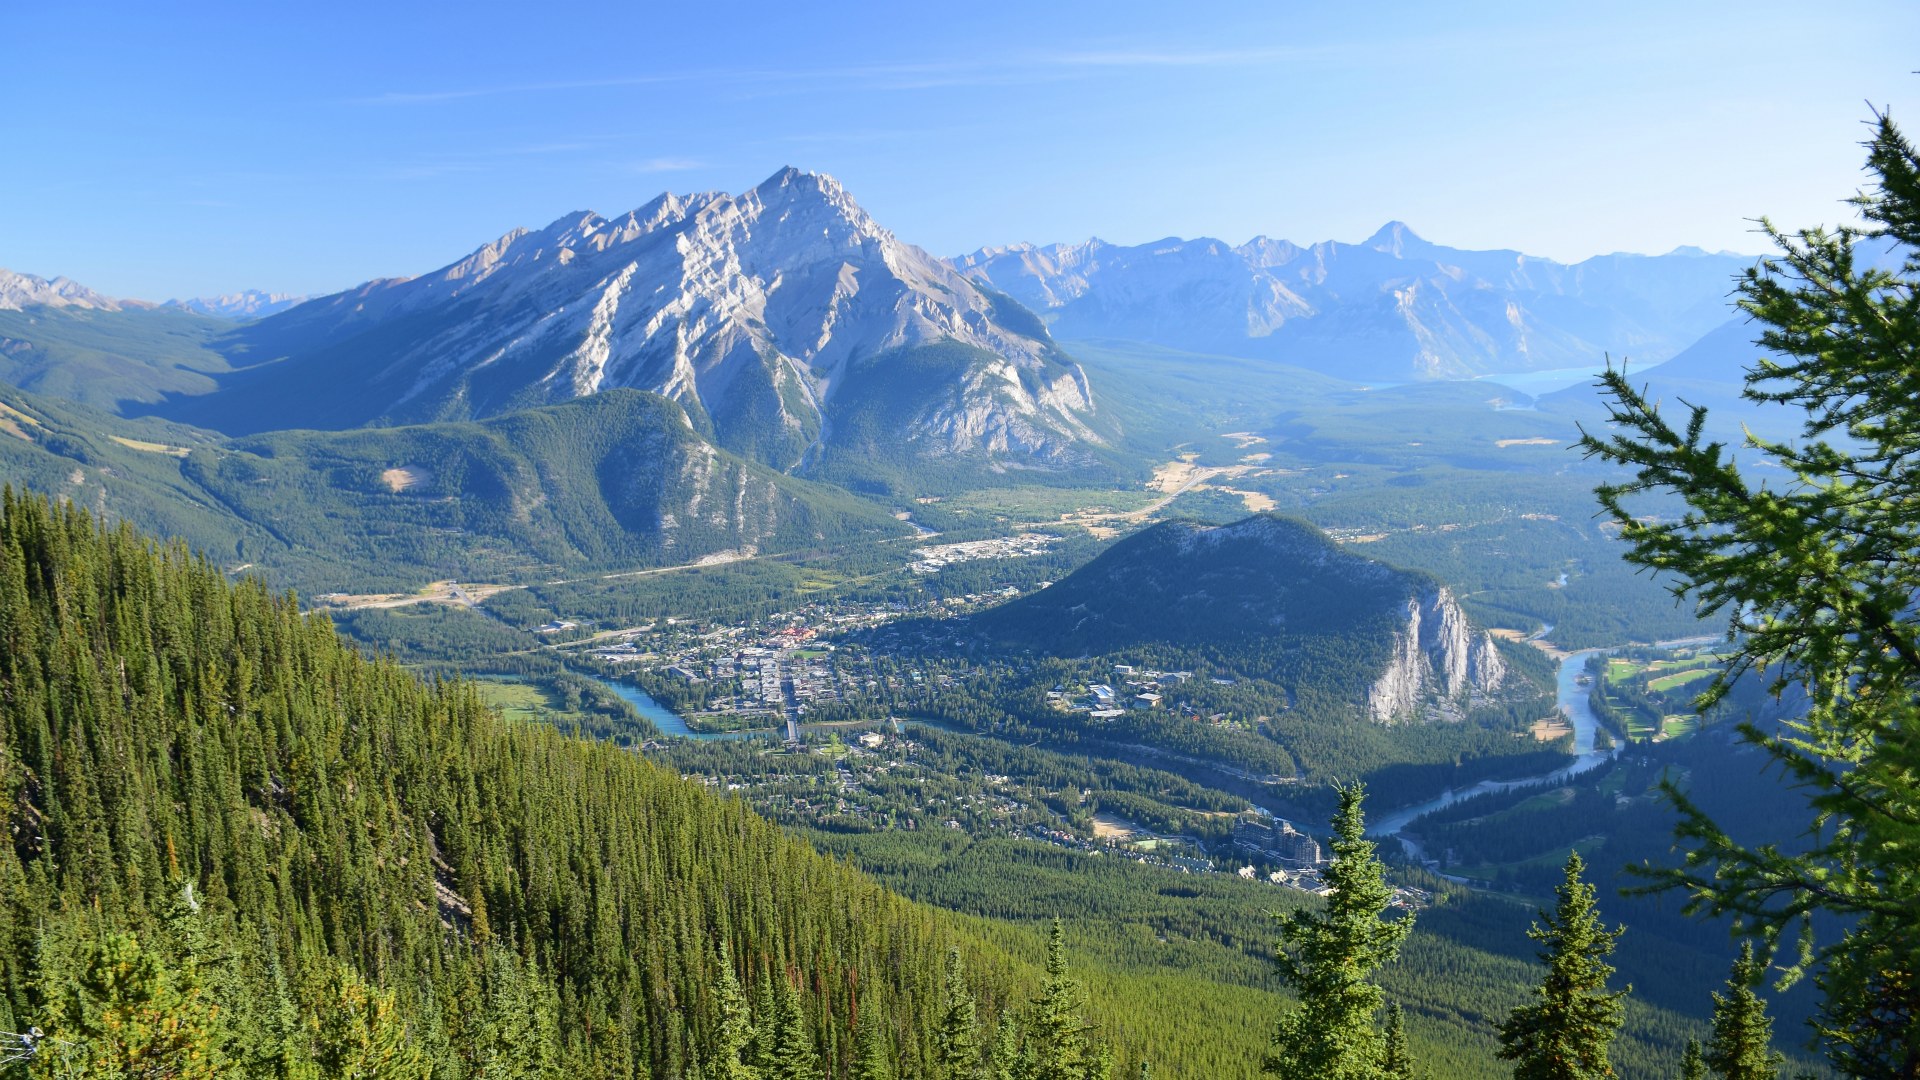 View from Sulphur Mountain, Banff National Park